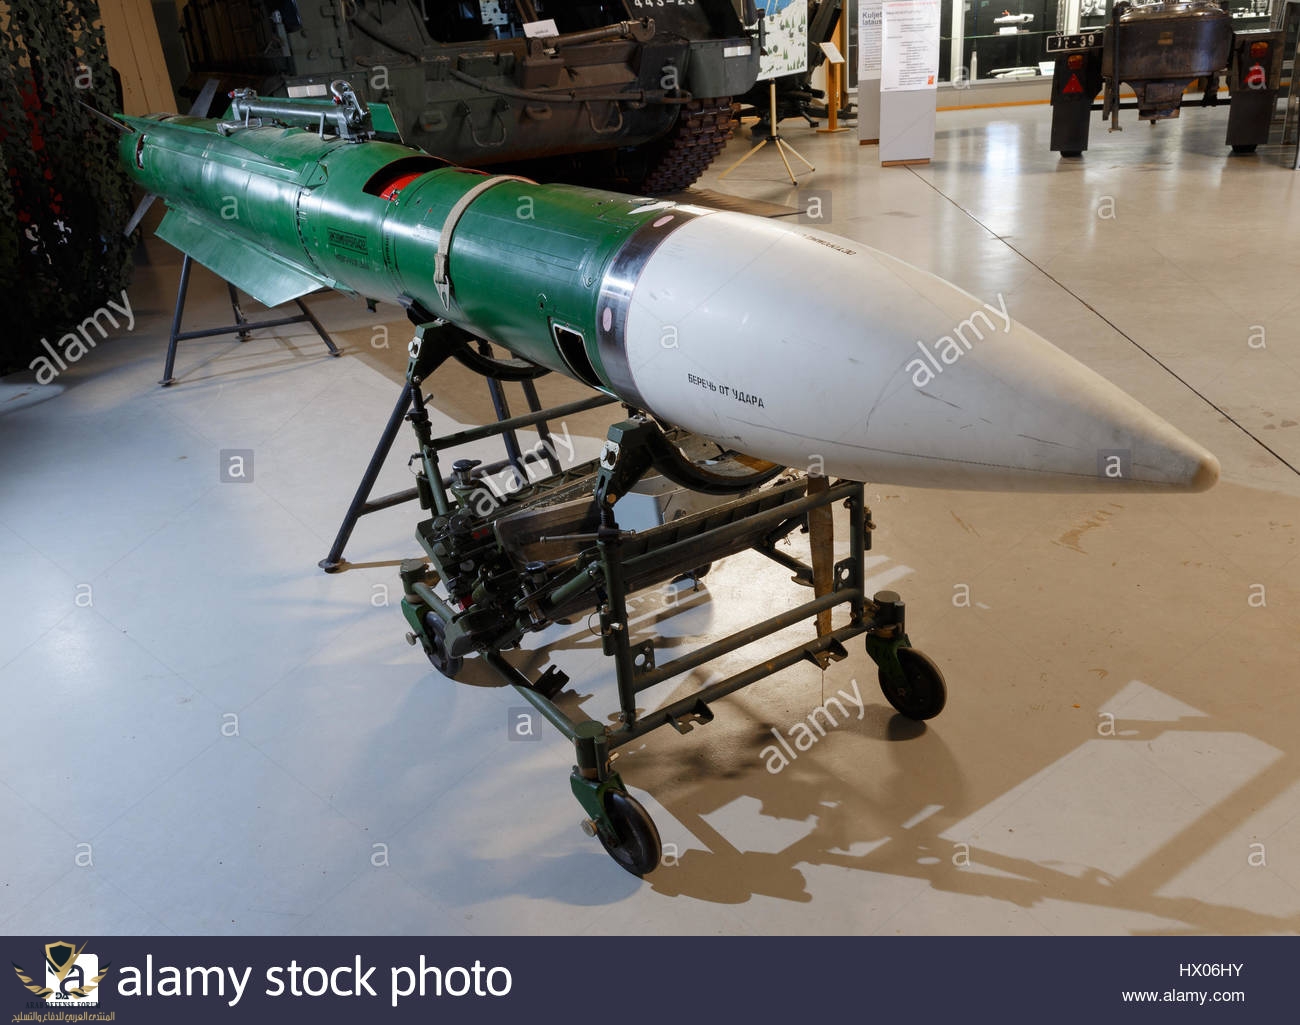 instruction-version-of-the-buk-m1-surface-to-air-missile-on-display-HX06HY.jpg